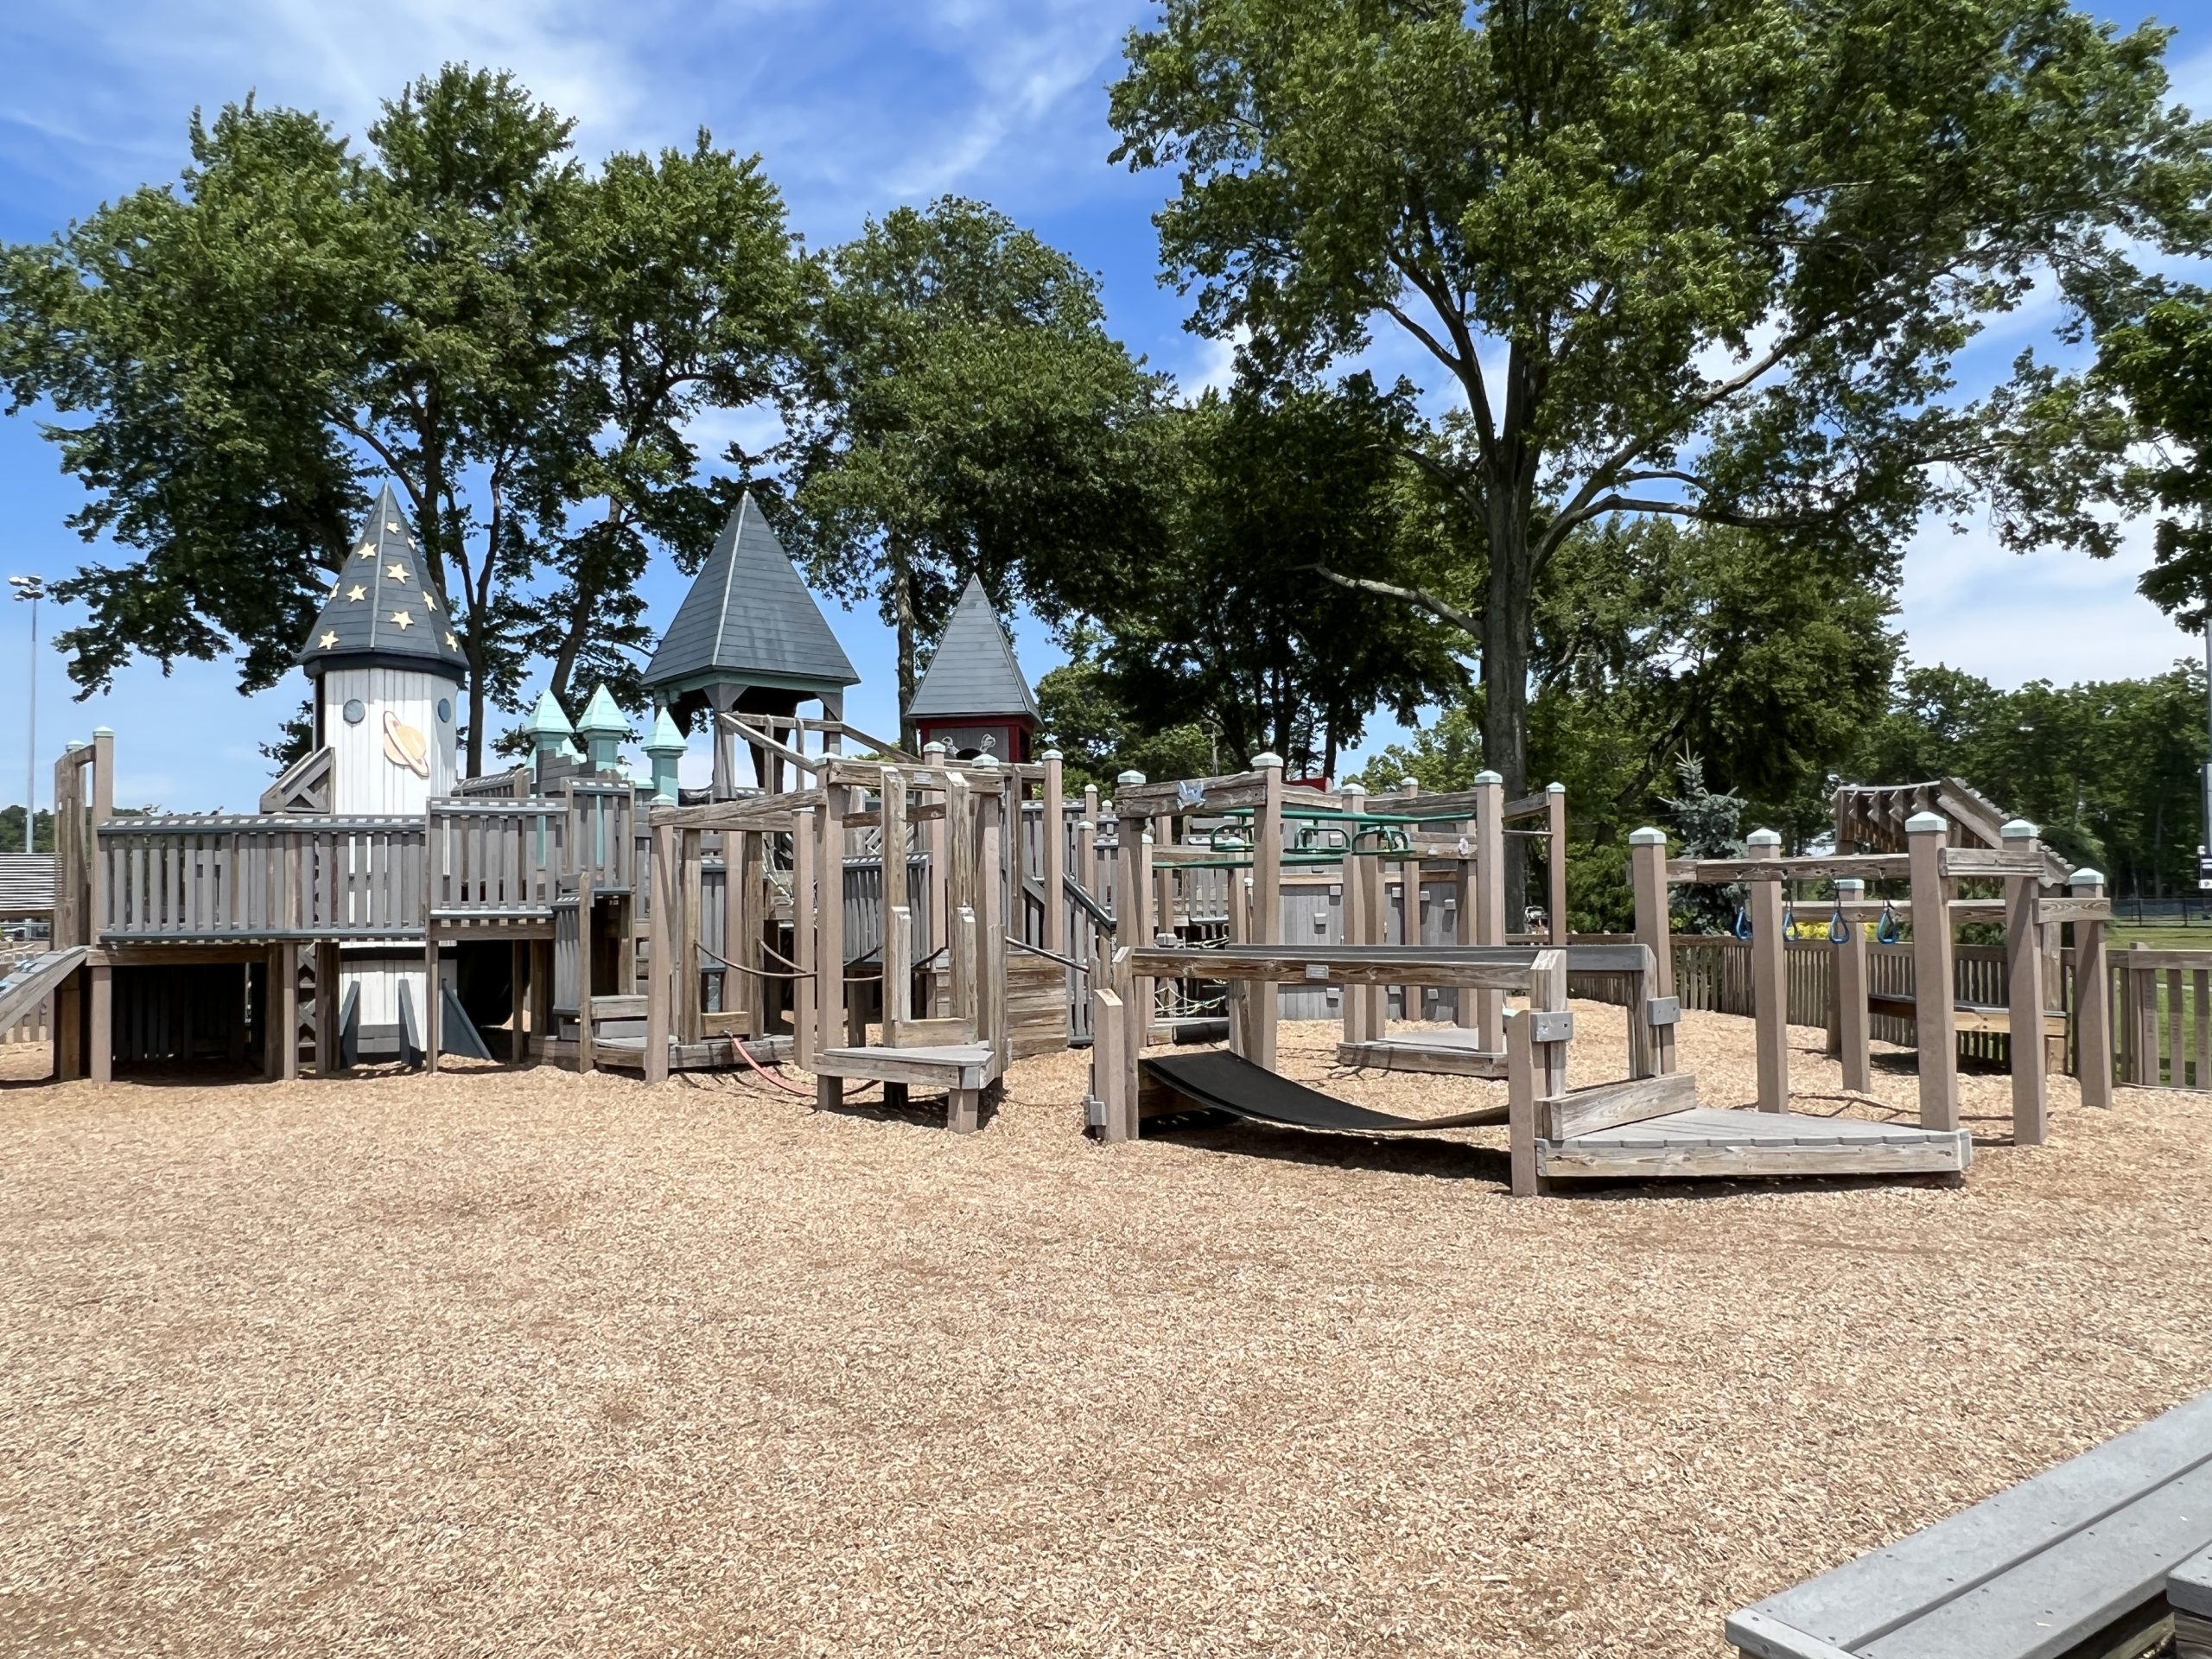 Main Playground at Imagination Station Playground in Roxbury NJ - WIDE view of back with bridges and monkey bars and rings